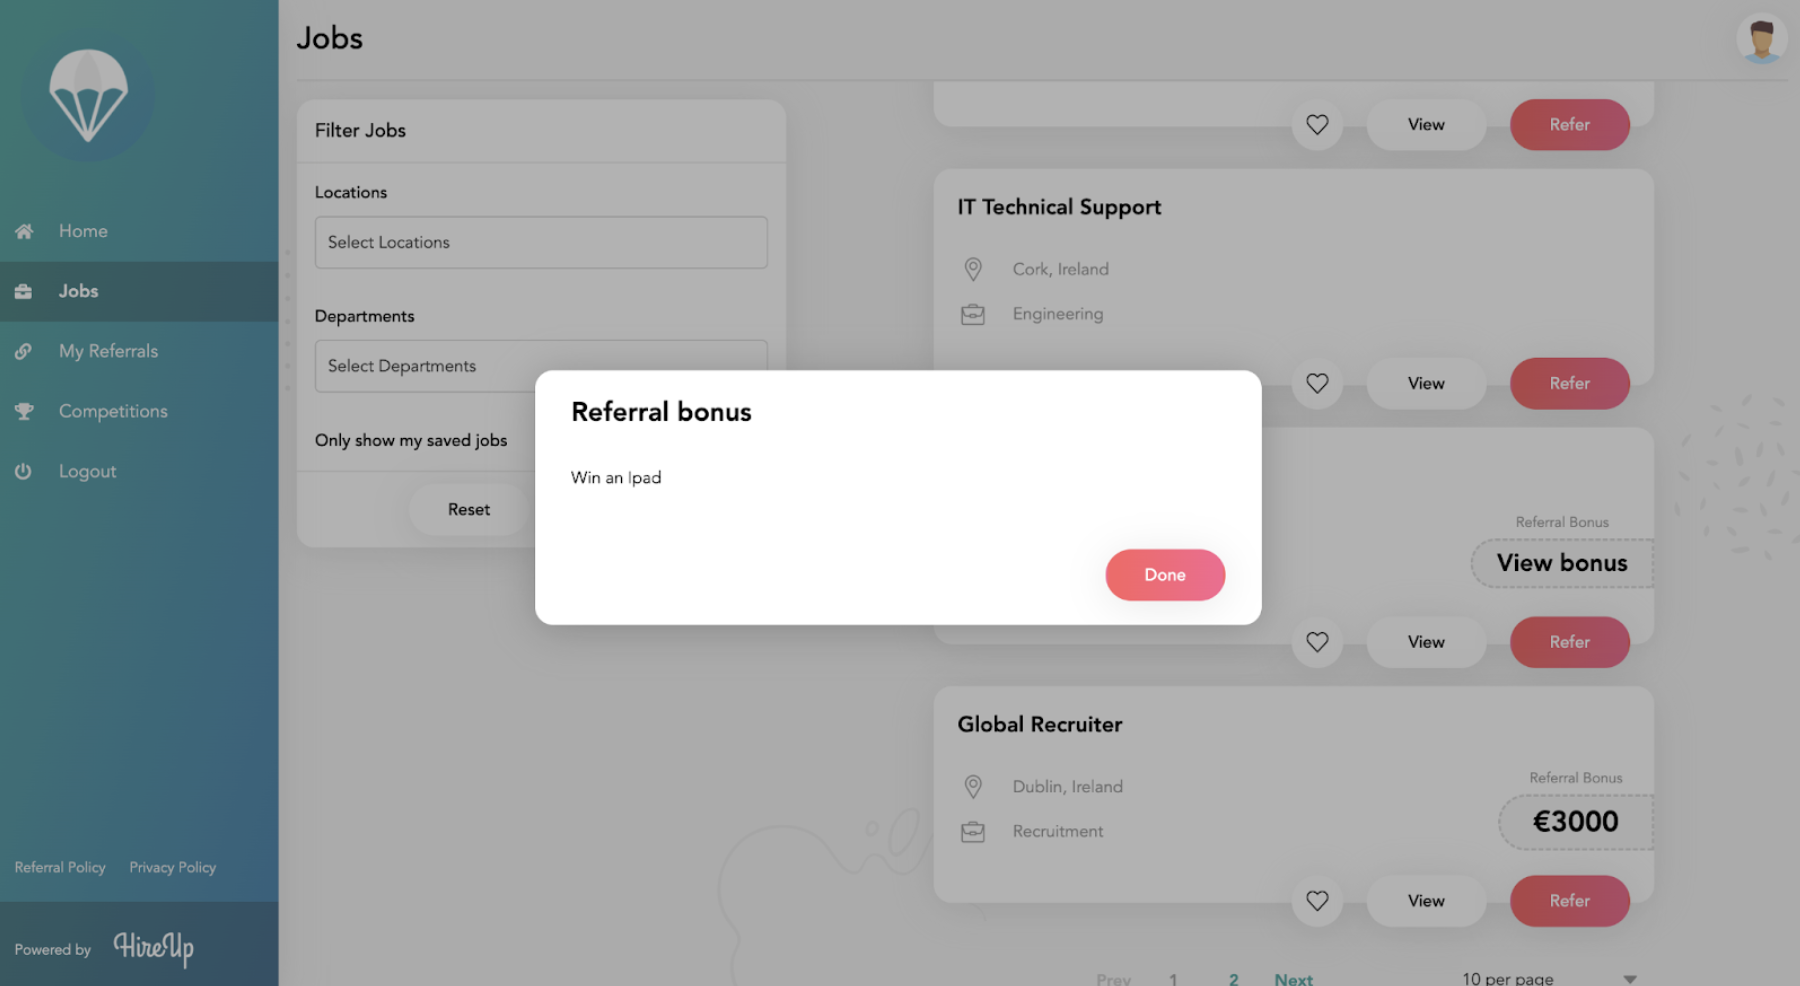 Referral bonus modal on Jobs page in HireUp